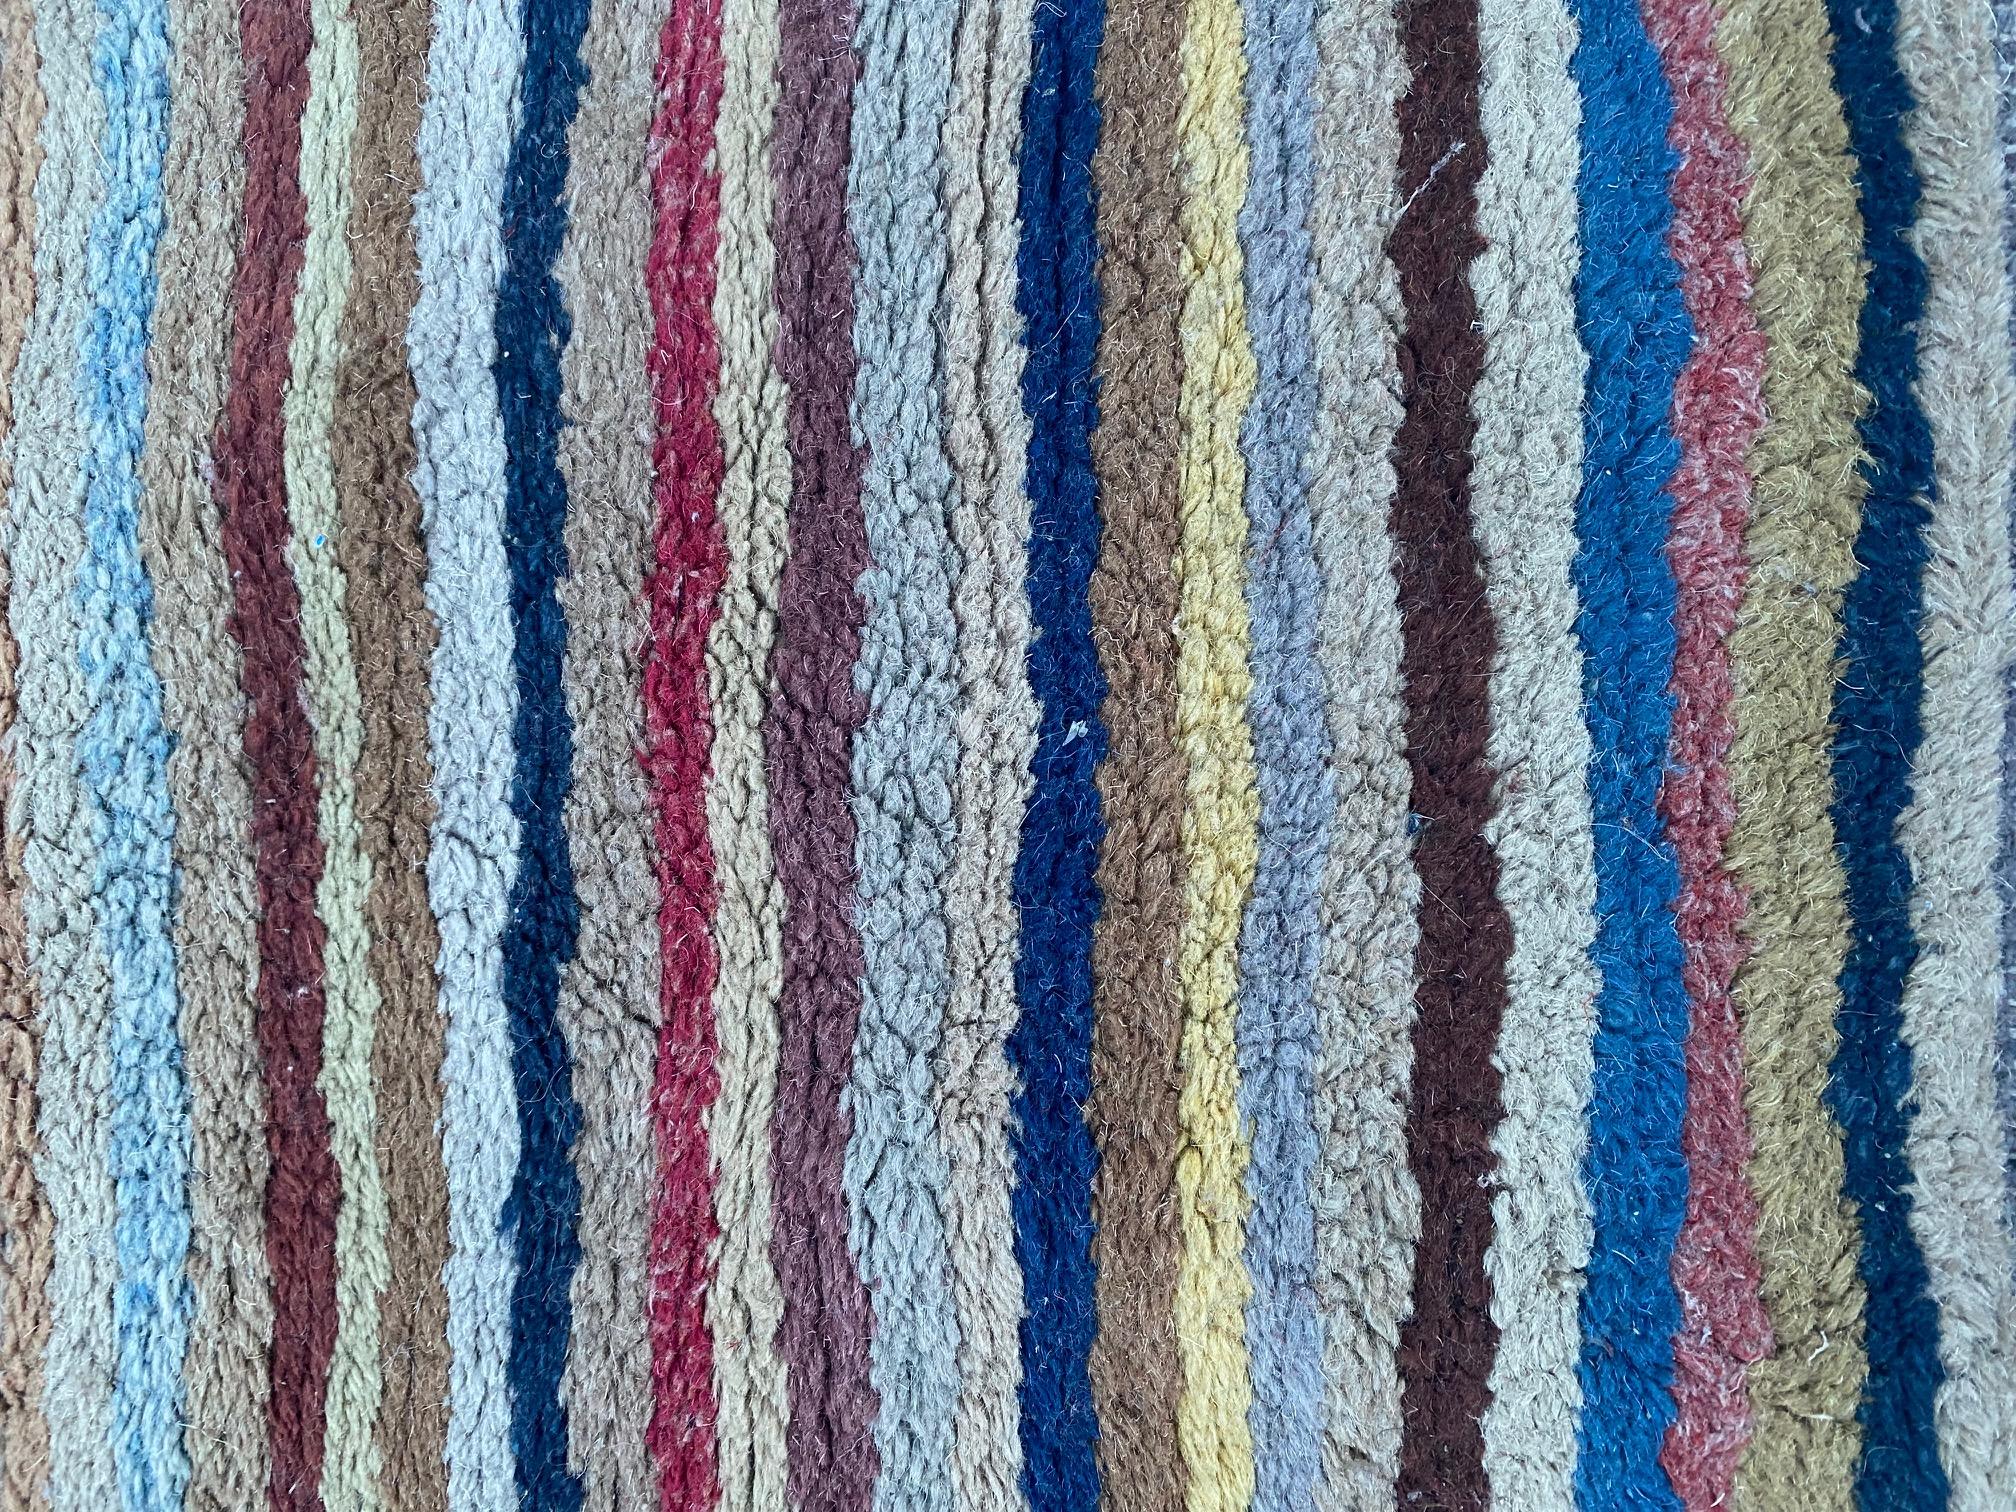 Tibetan wool striped scatter rug, circa 1950, a hand knotted wool carpet featuring a series of vibrant multi-colored stripes. Rug remains in excellent condition.

Measures: 59 in Long x 32 in Wide.